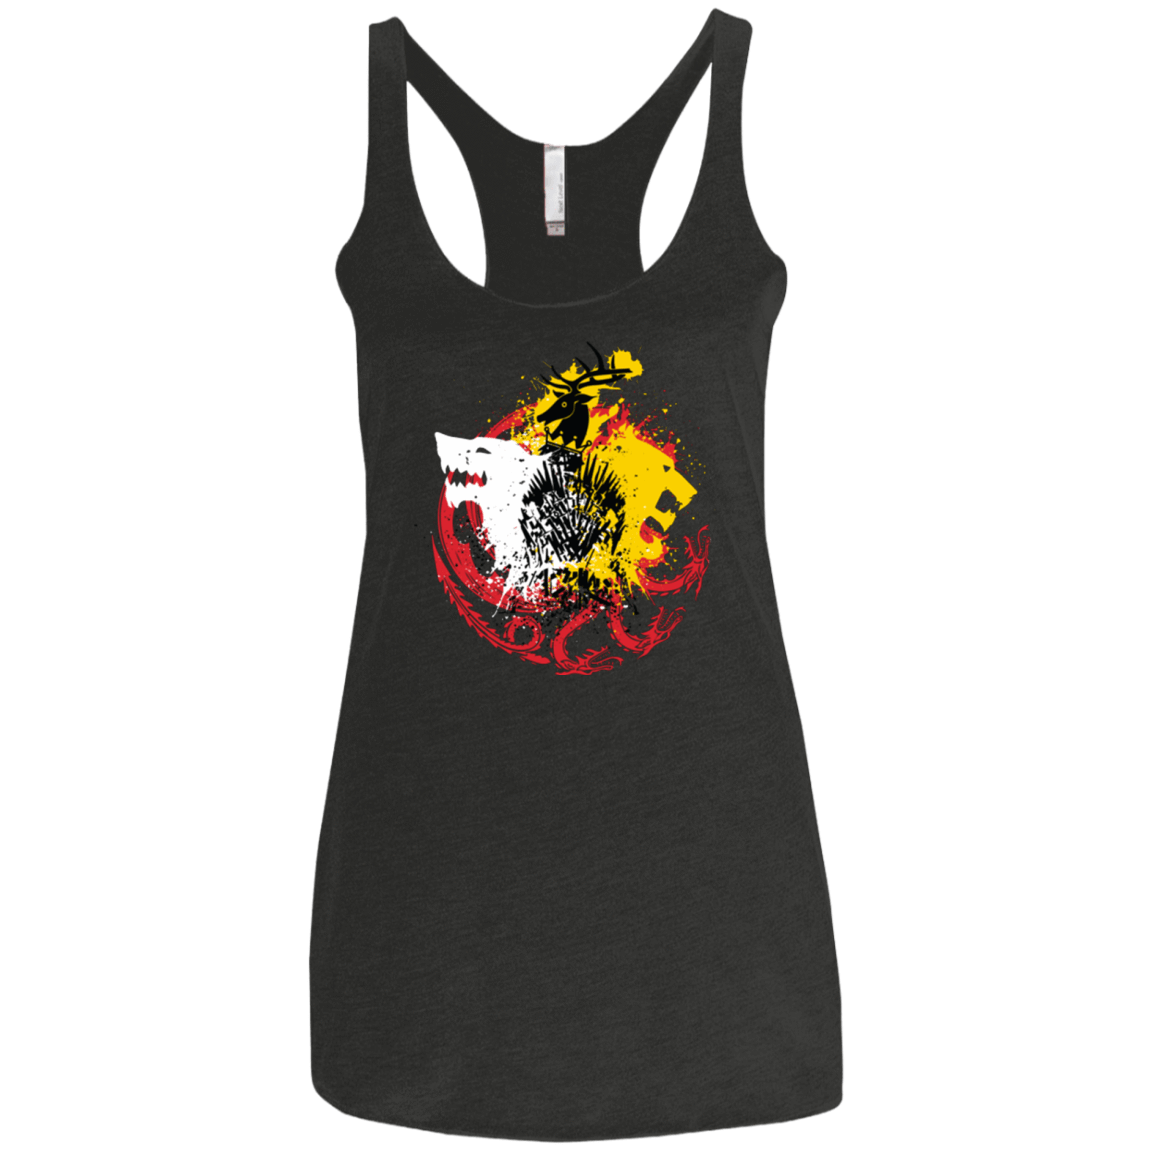 T-Shirts Vintage Black / X-Small GAME OF COLORS Women's Triblend Racerback Tank